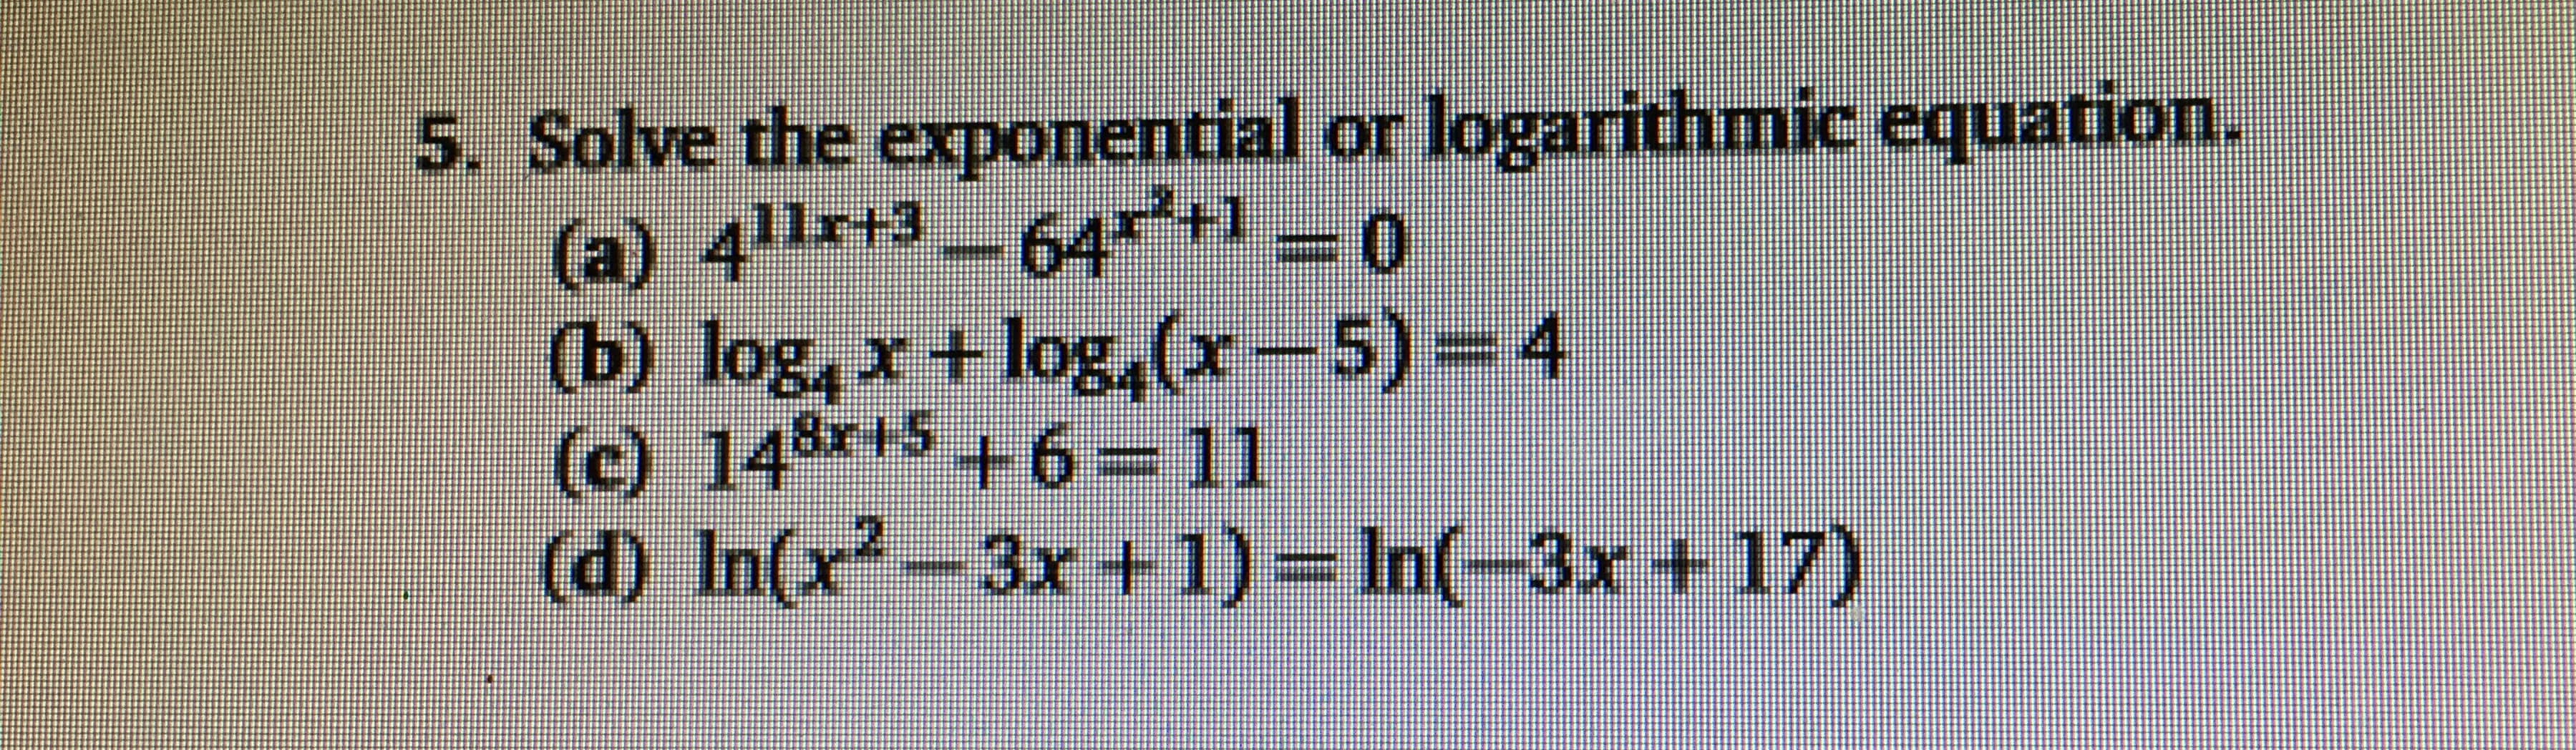 5. Solve the exponential or logarithmic equation.
(a) 411rt3-64 0
Gு) log,r +log,(-5) *
(c) 148+5 ++6-11
4
3x+ 1) In(-3x+ 17)
